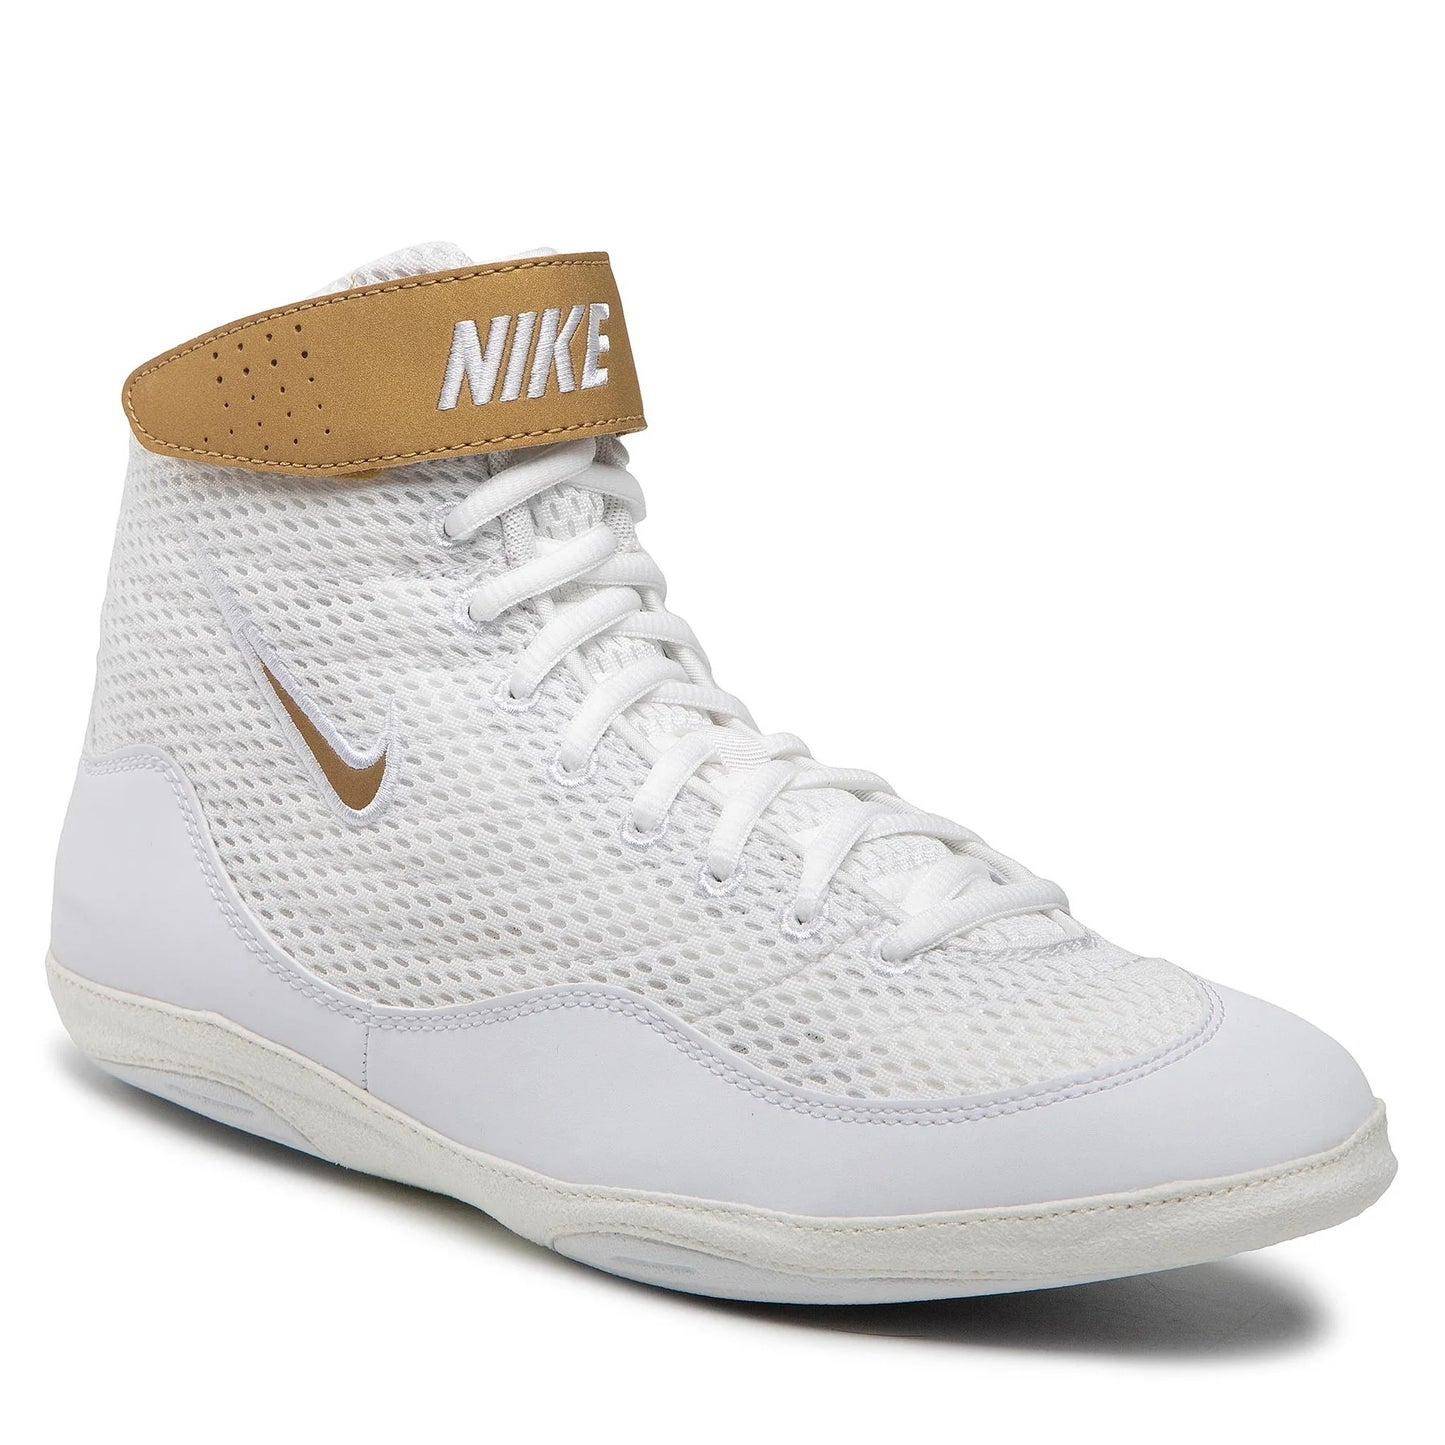 Chaussures De Lutte Inflict 3 Nike - Blanc/Or